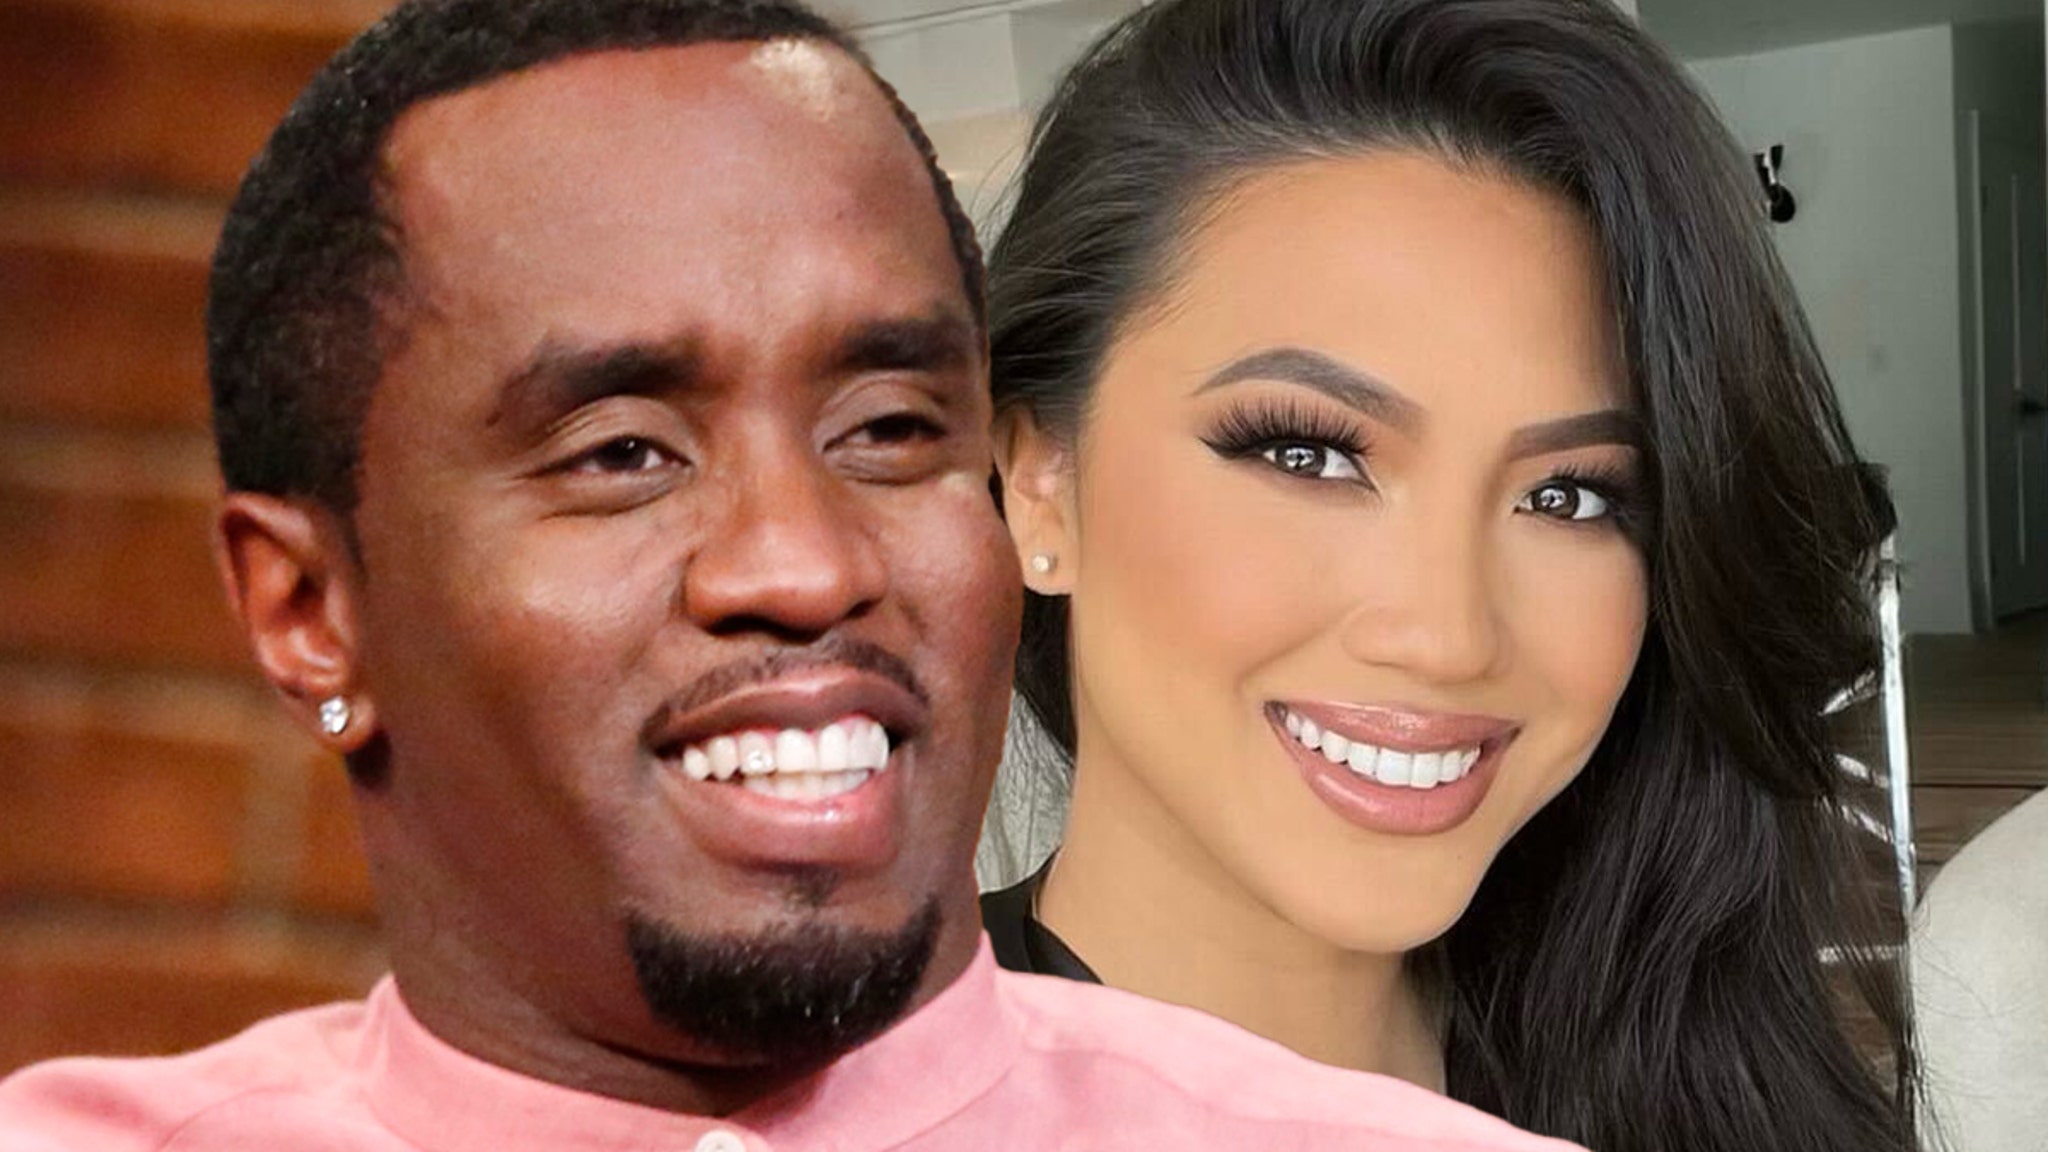 All 18 Yers Old Boy And 32yers Old Girl Romance Videos - Diddy's Mystery Baby Mama Revealed as 28-Year-Old Cyber Security Specialist